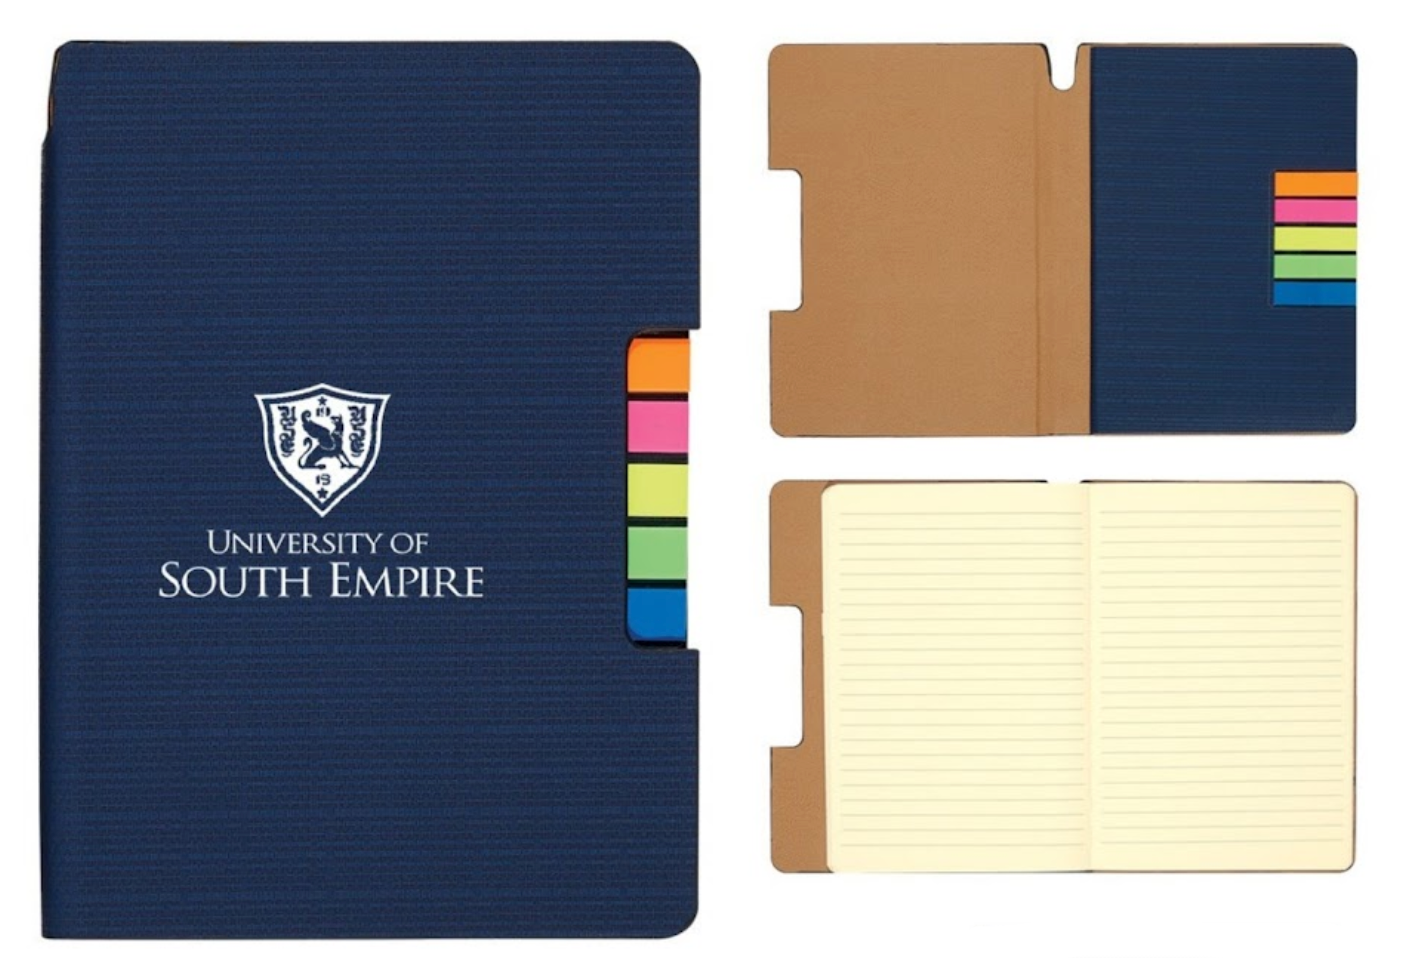 Unique promotional swag like notebooks with custom sticky notes